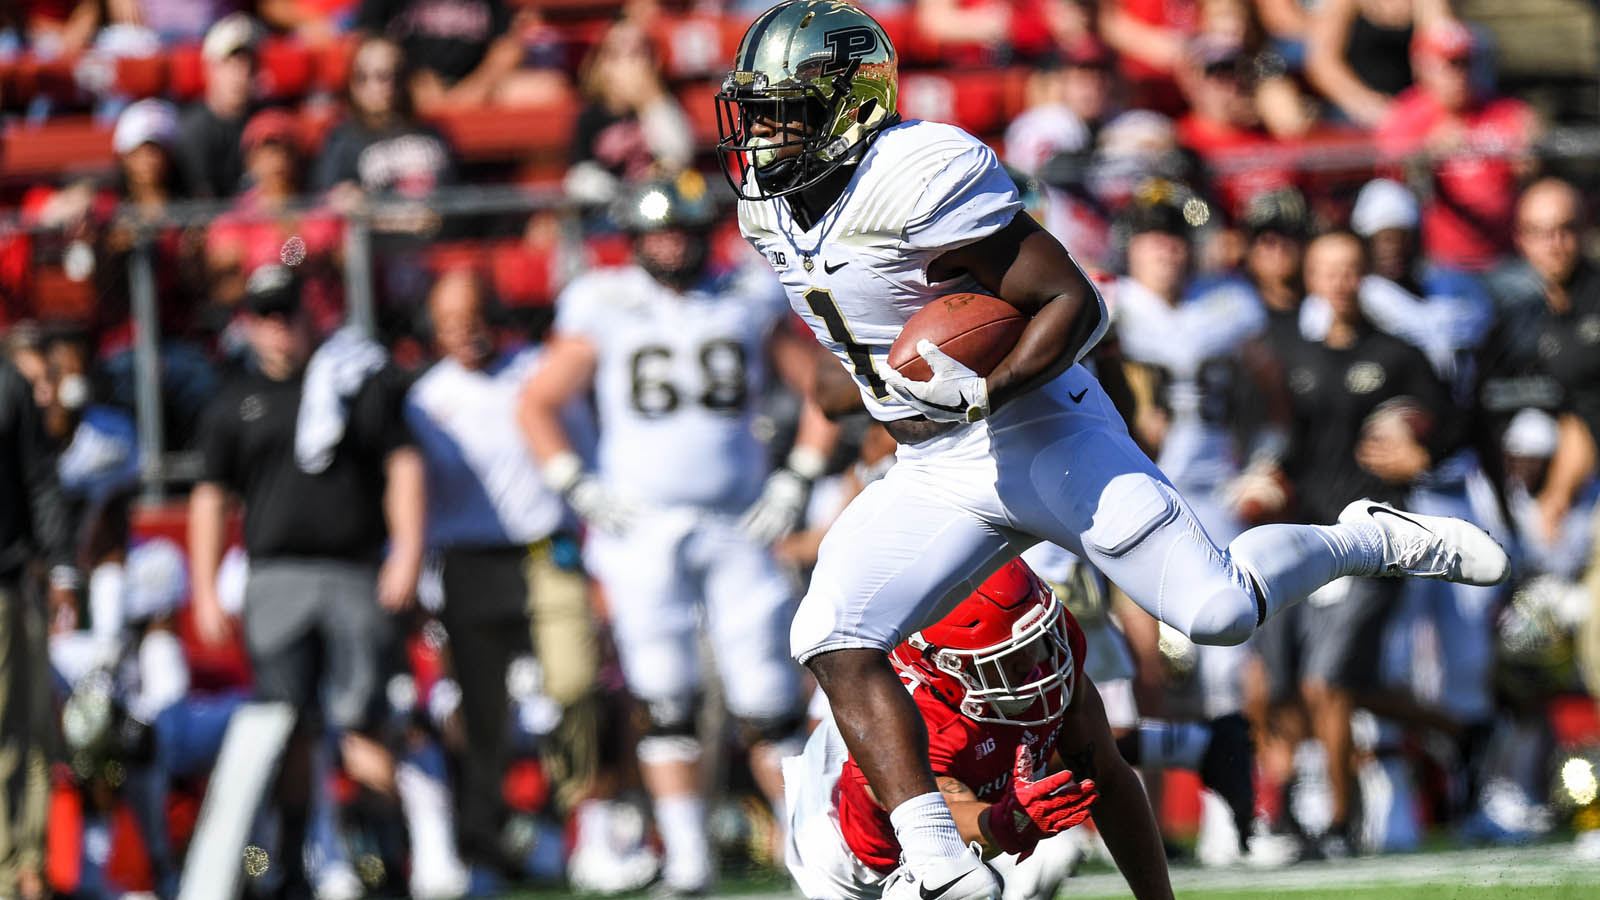 Purdue's offense stifled in 14-12 loss to Rutgers